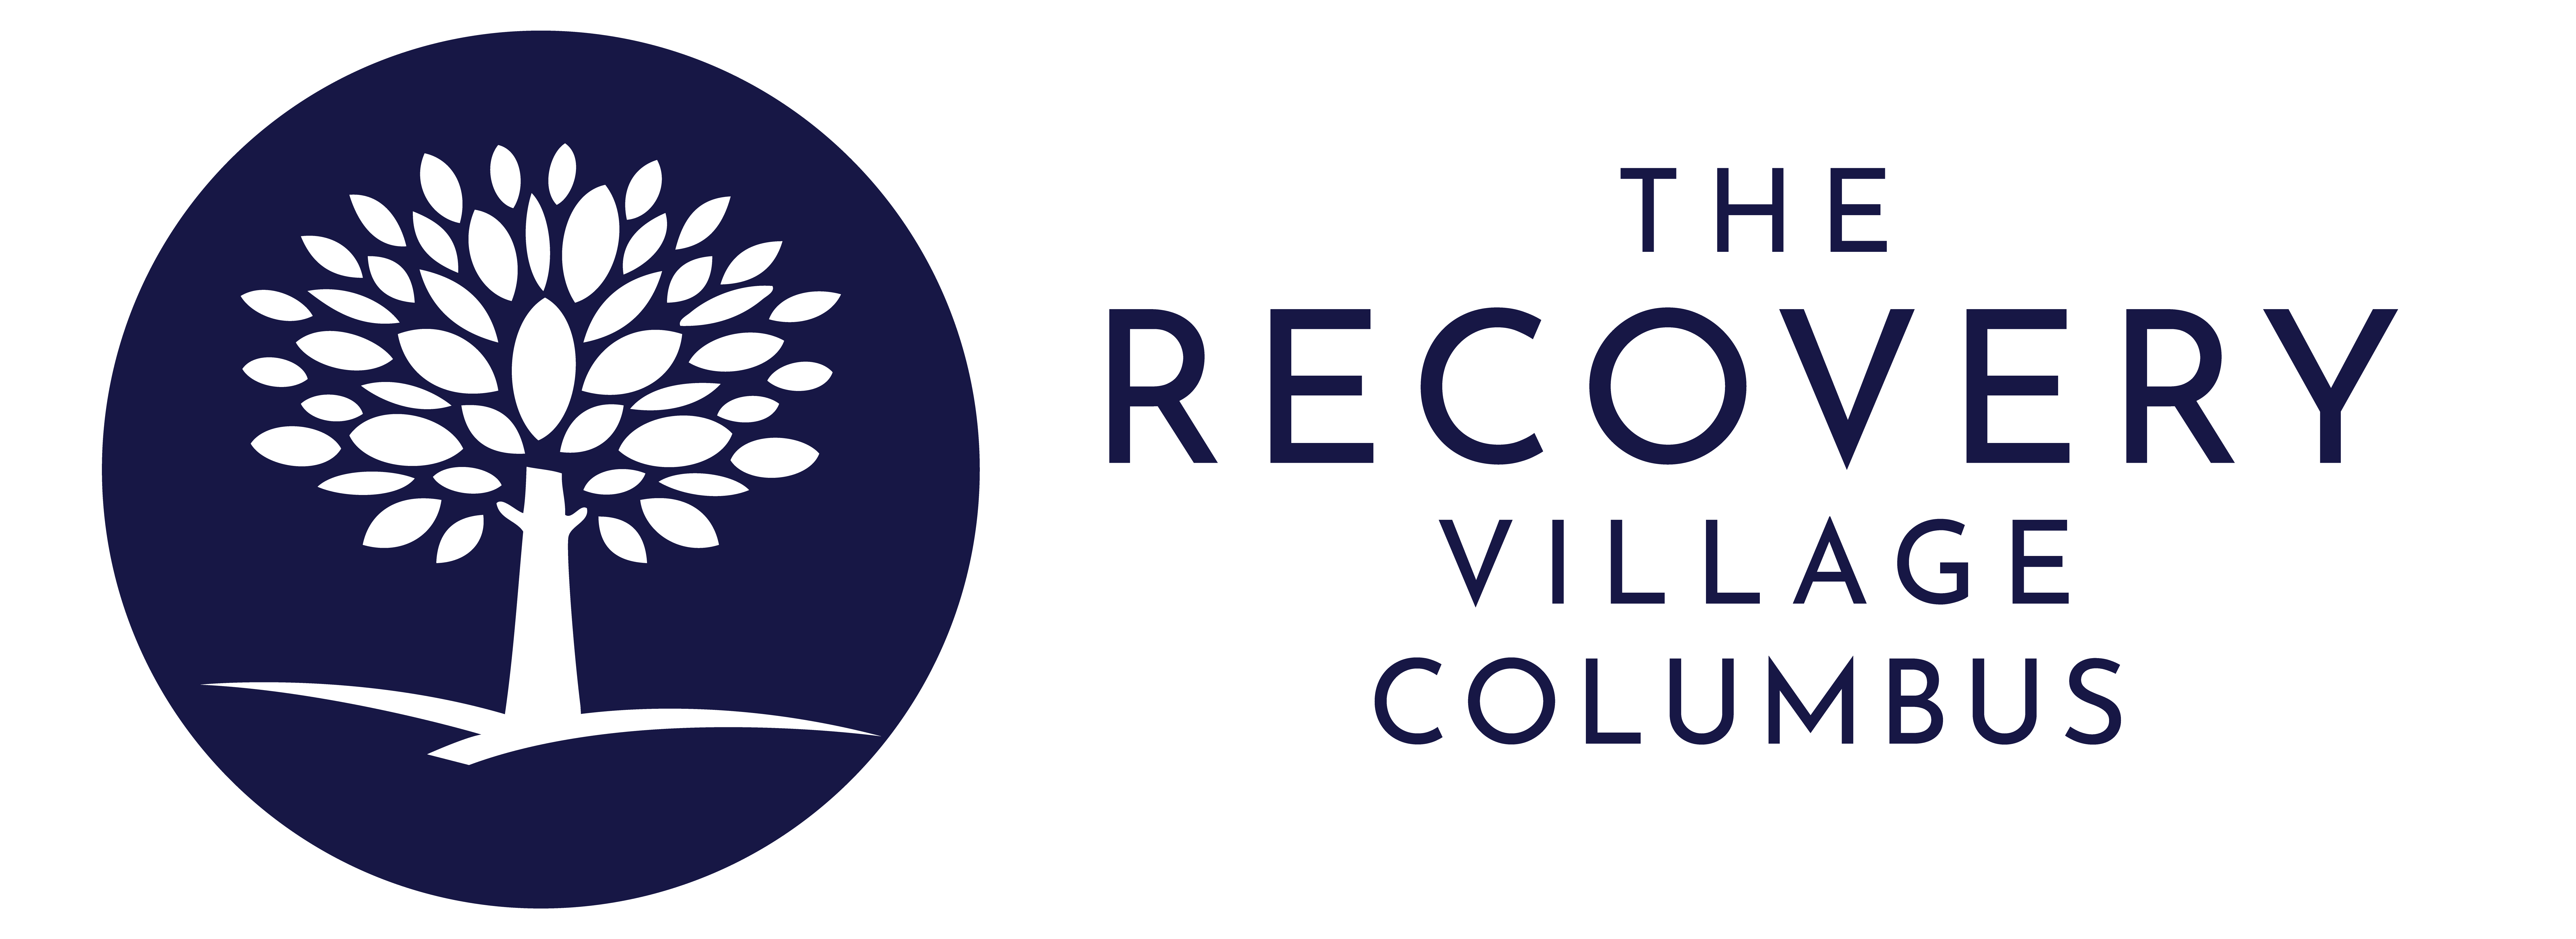 The Recovery Village Columbus